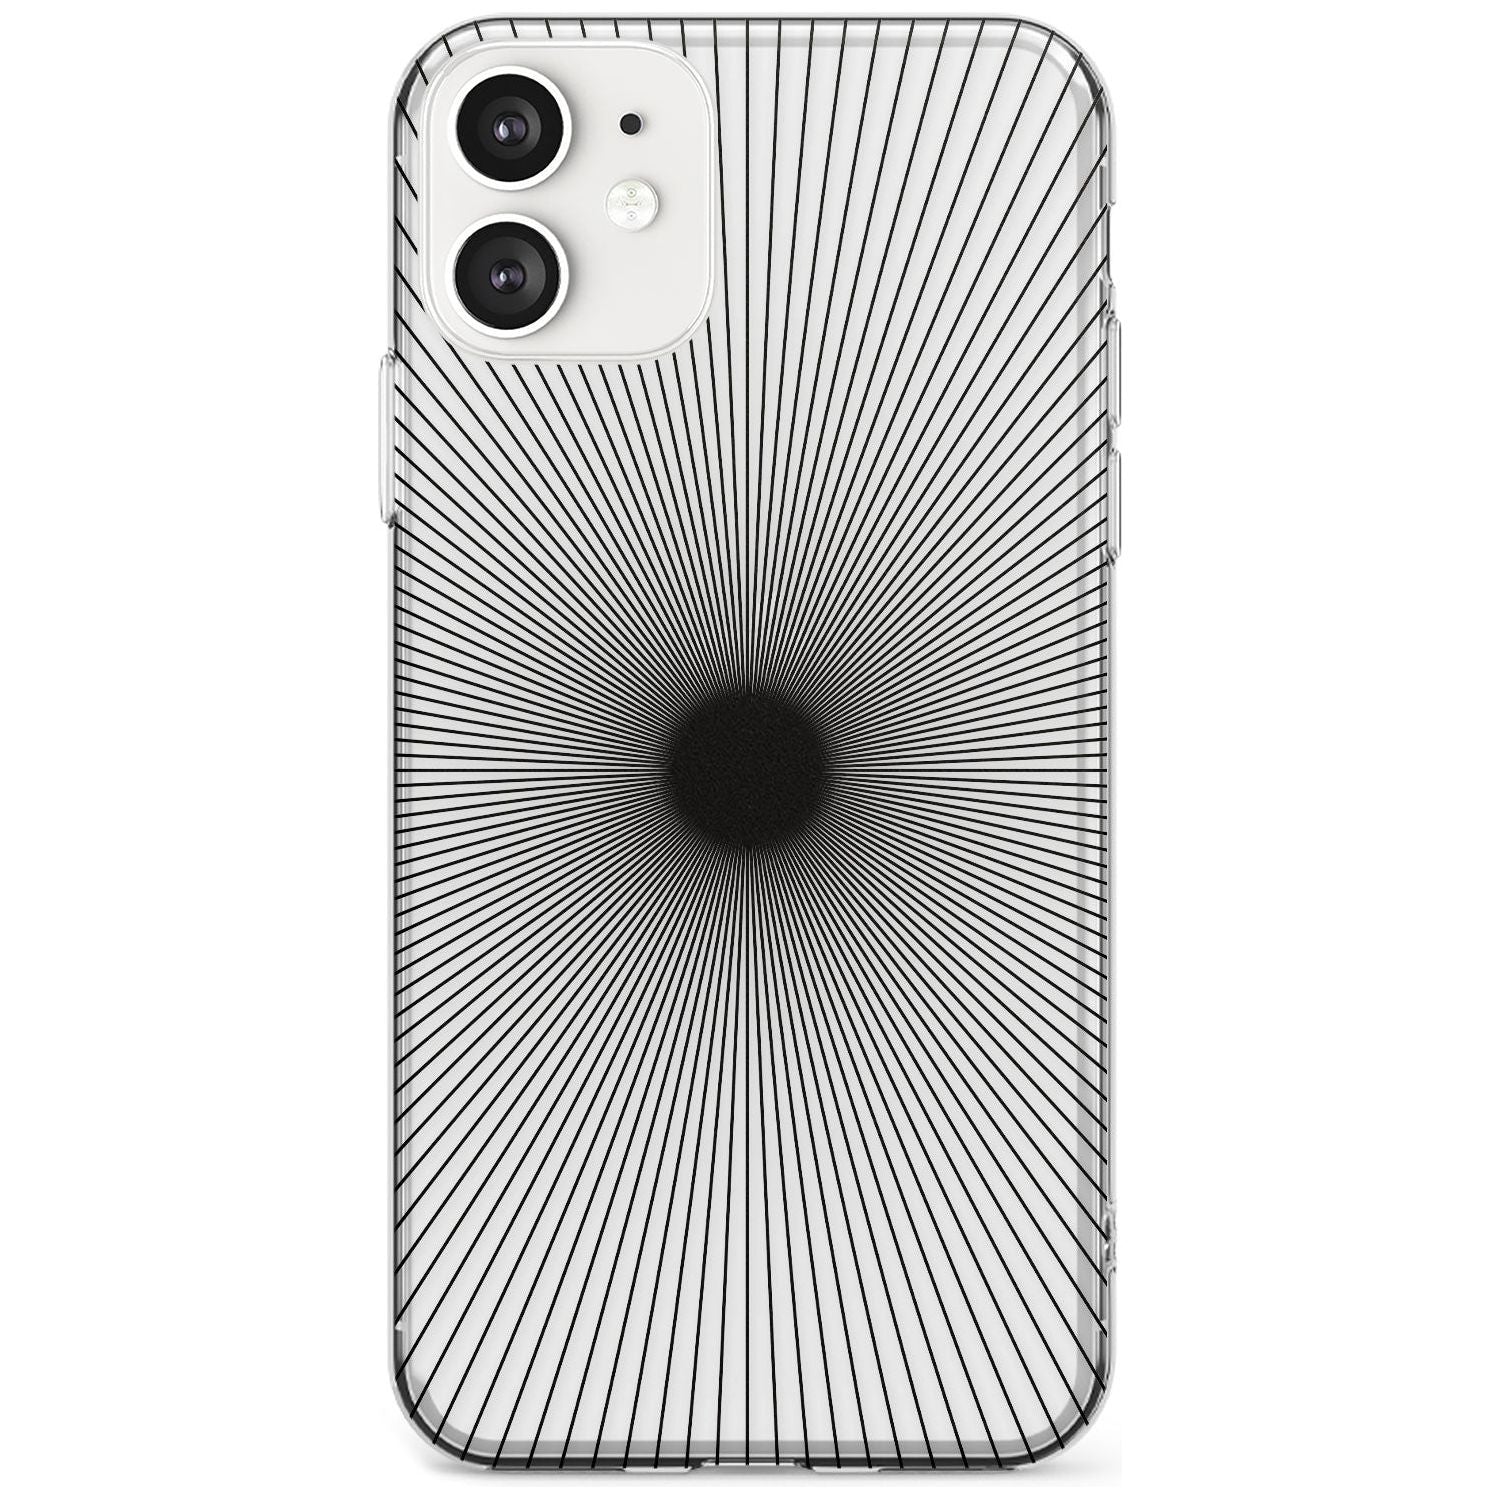 Abstract Lines: Sunburst Black Impact Phone Case for iPhone 11